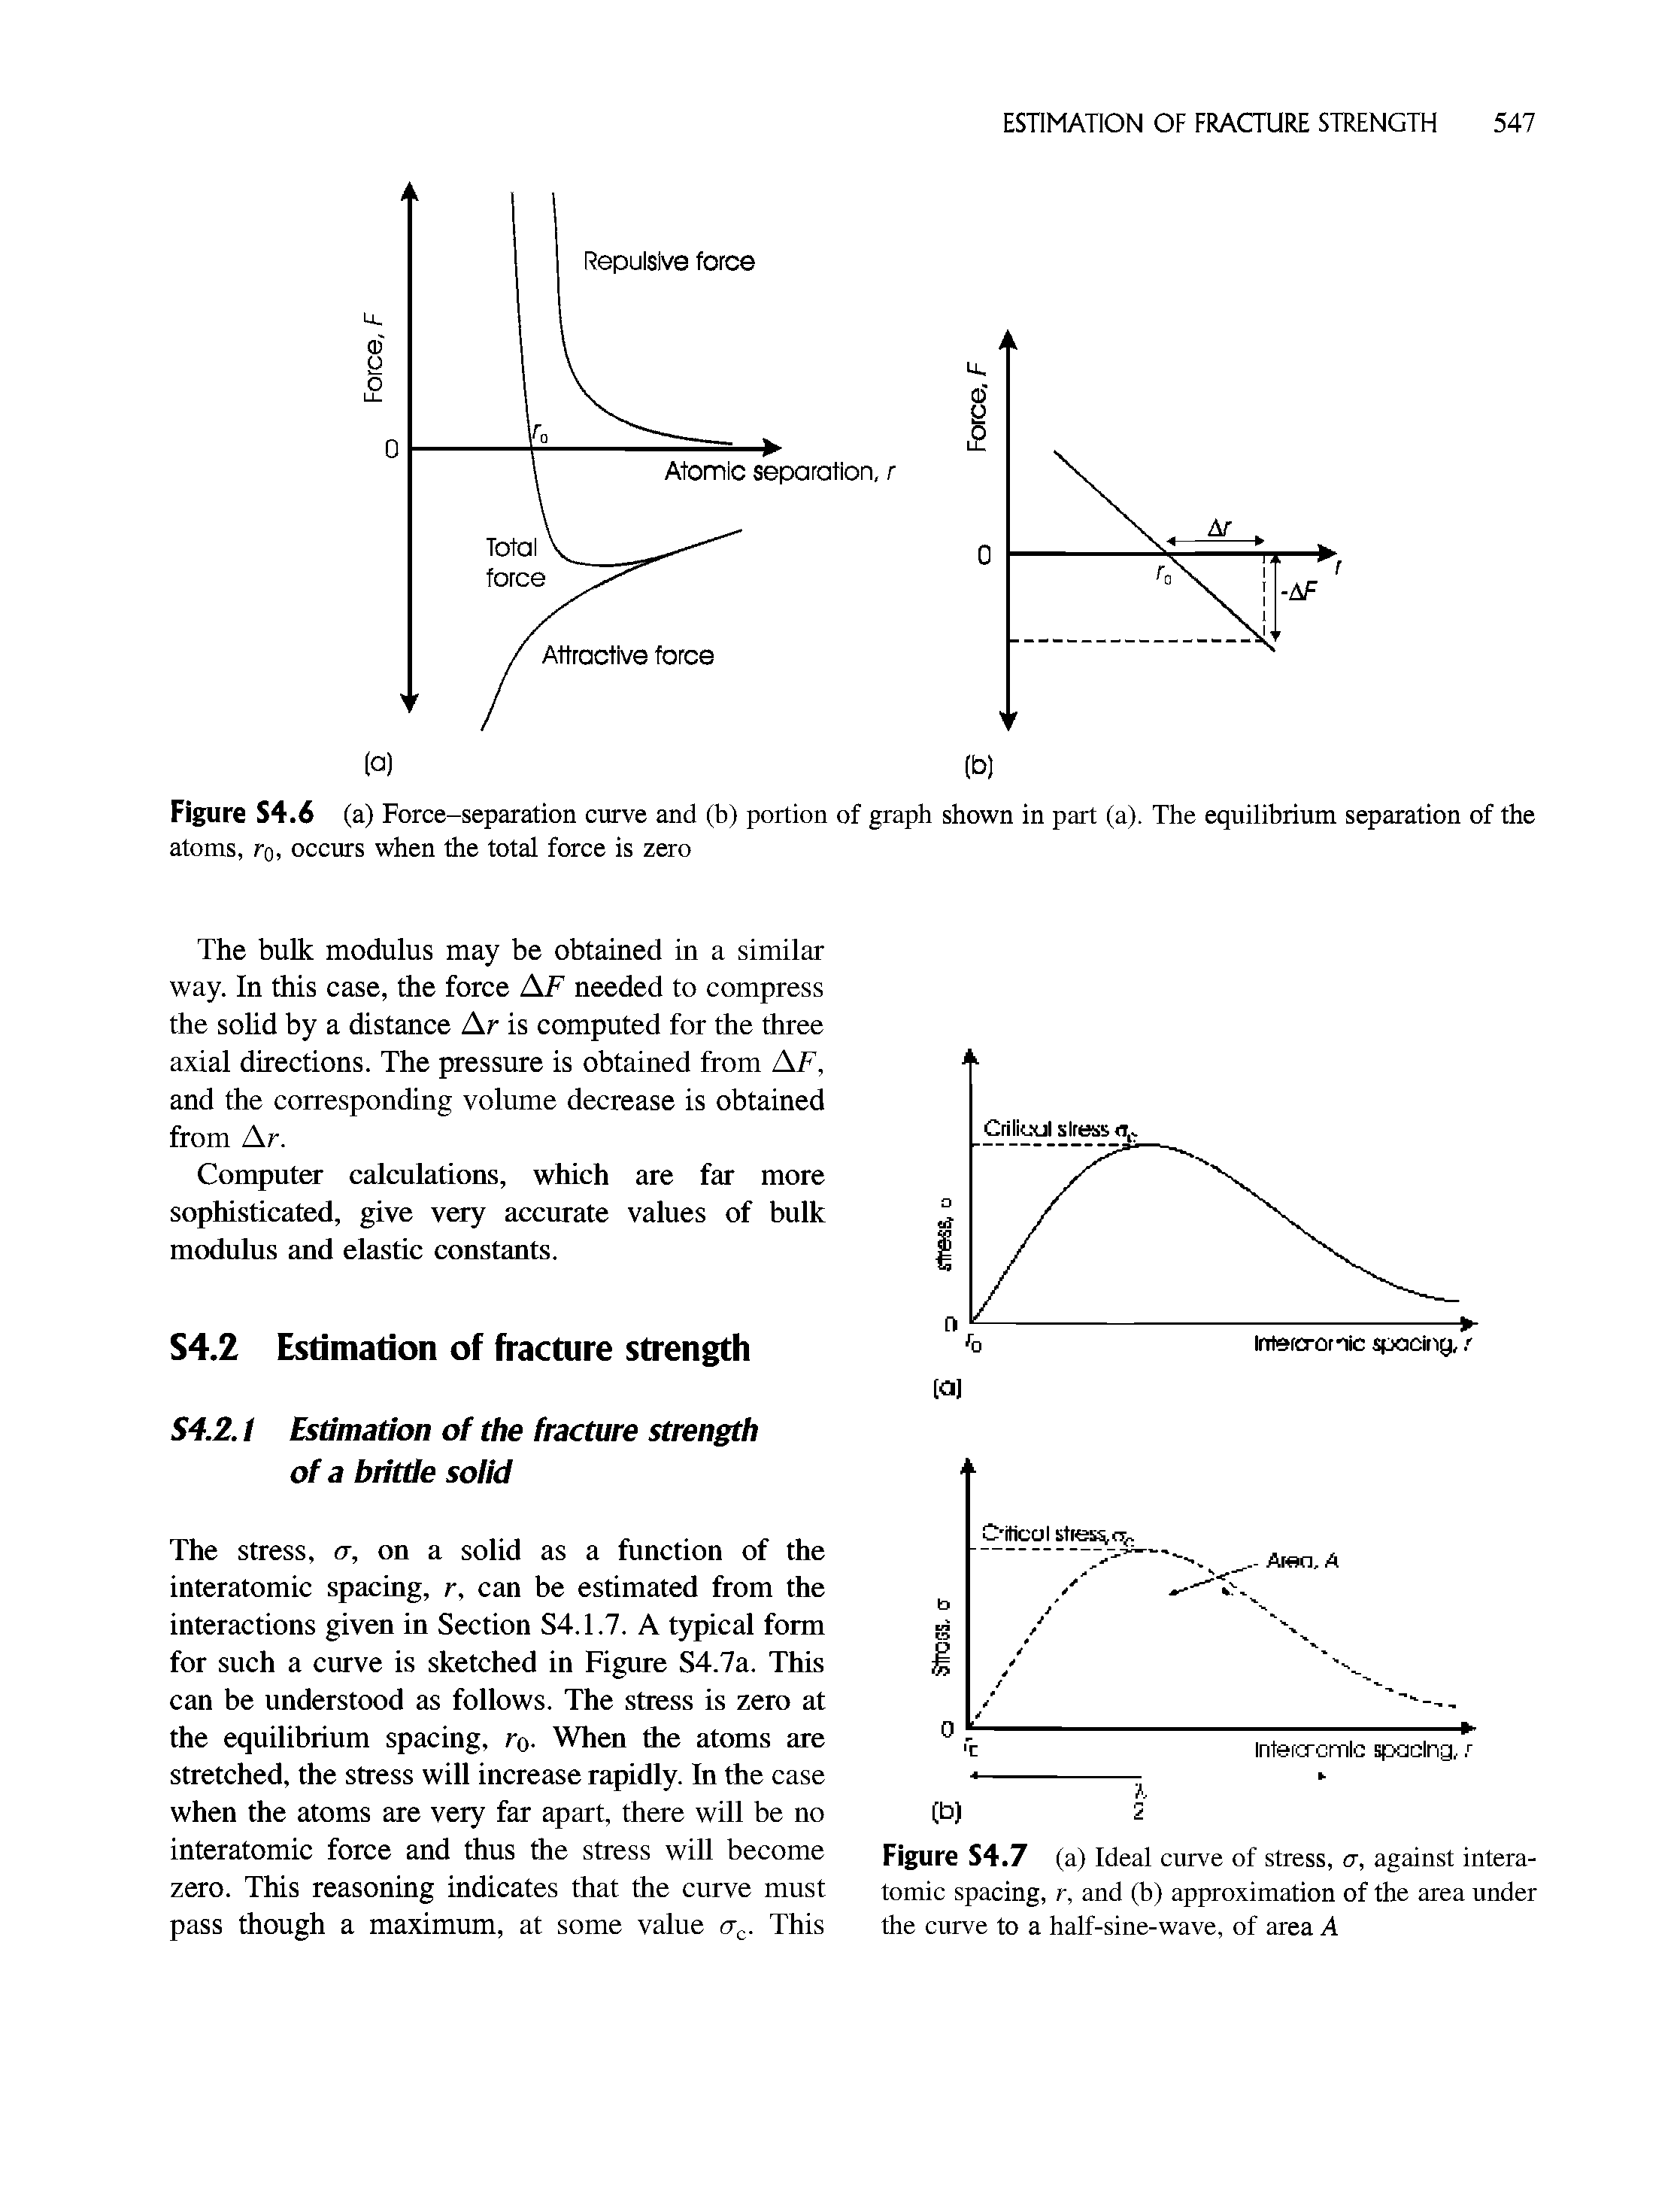 Figure S4.6 (a) Force-separation curve and (b) portion of graph shown in part (a). The equilibrium separation of the atoms, ro, occurs when the total force is zero...